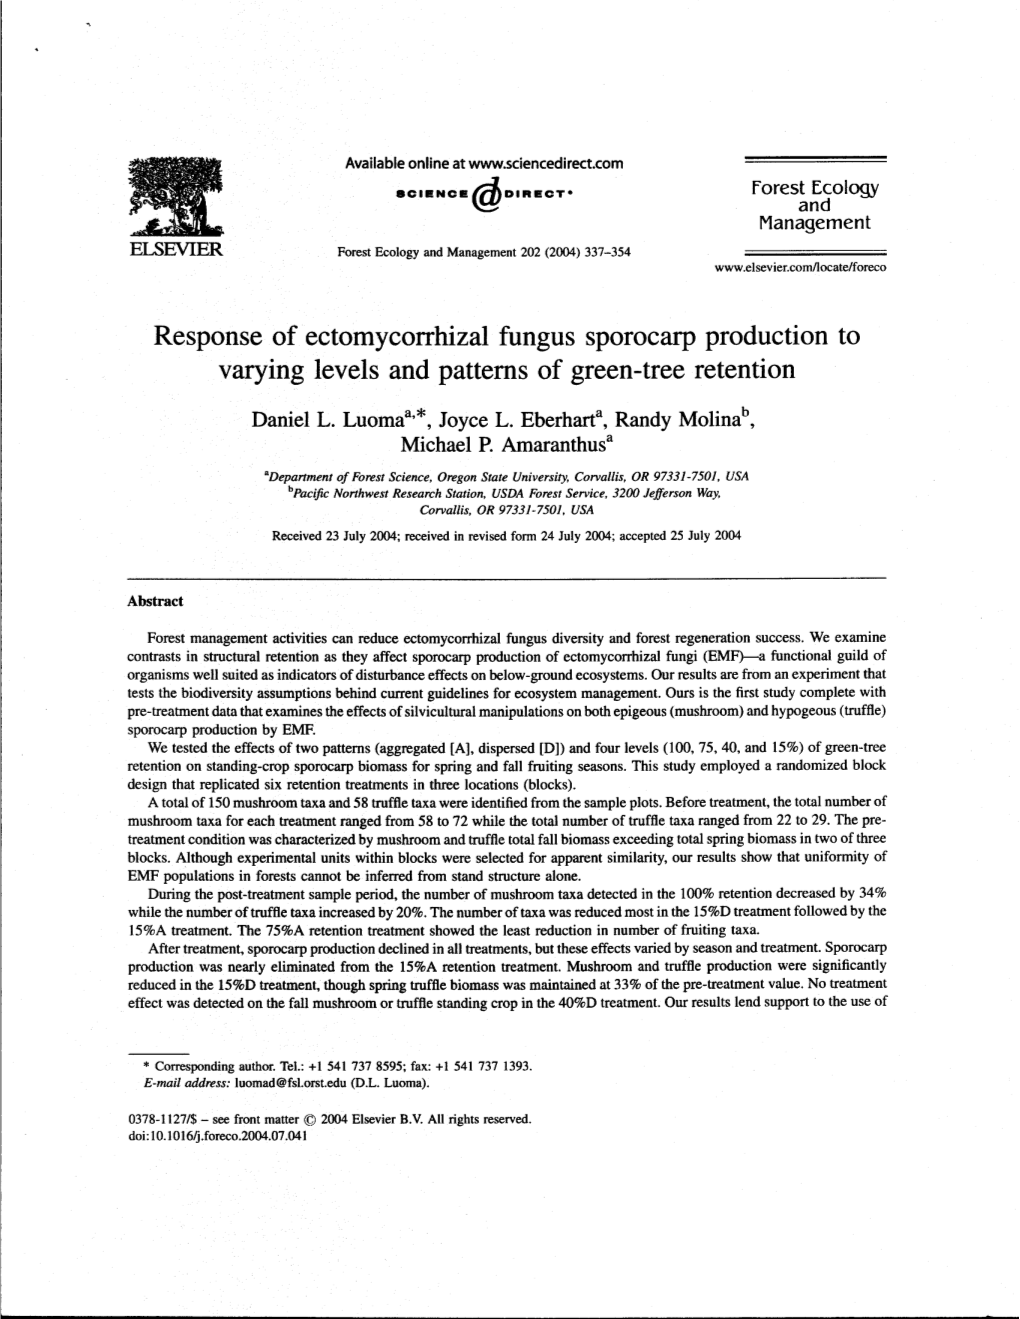 Response of Ectomycorrhizal Fungus Sporocarp Production to Ing Levels and Patterns of Green-Tree Retention